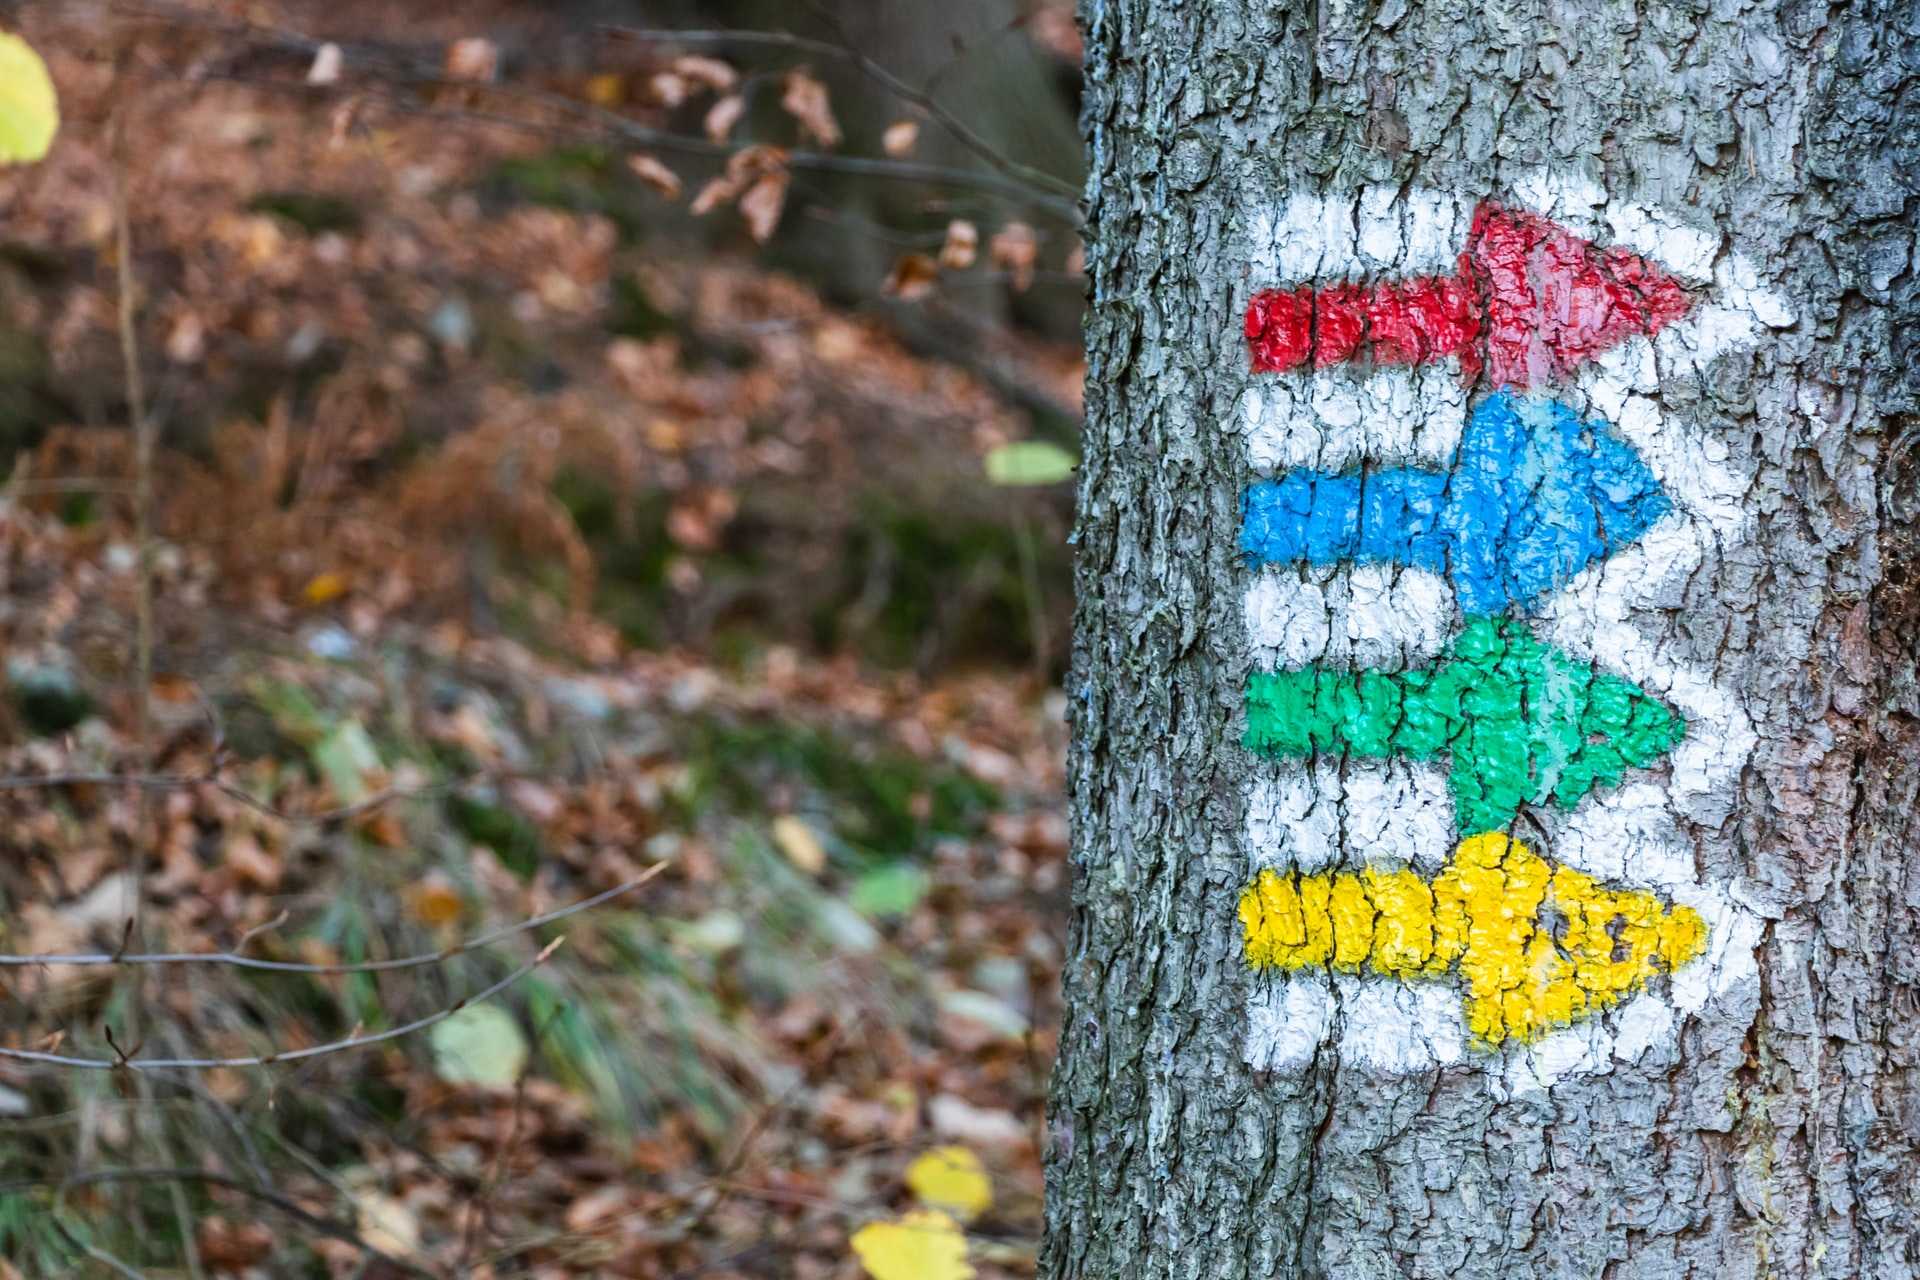 A tree with a bunch of colored arrows being used as reference markers.